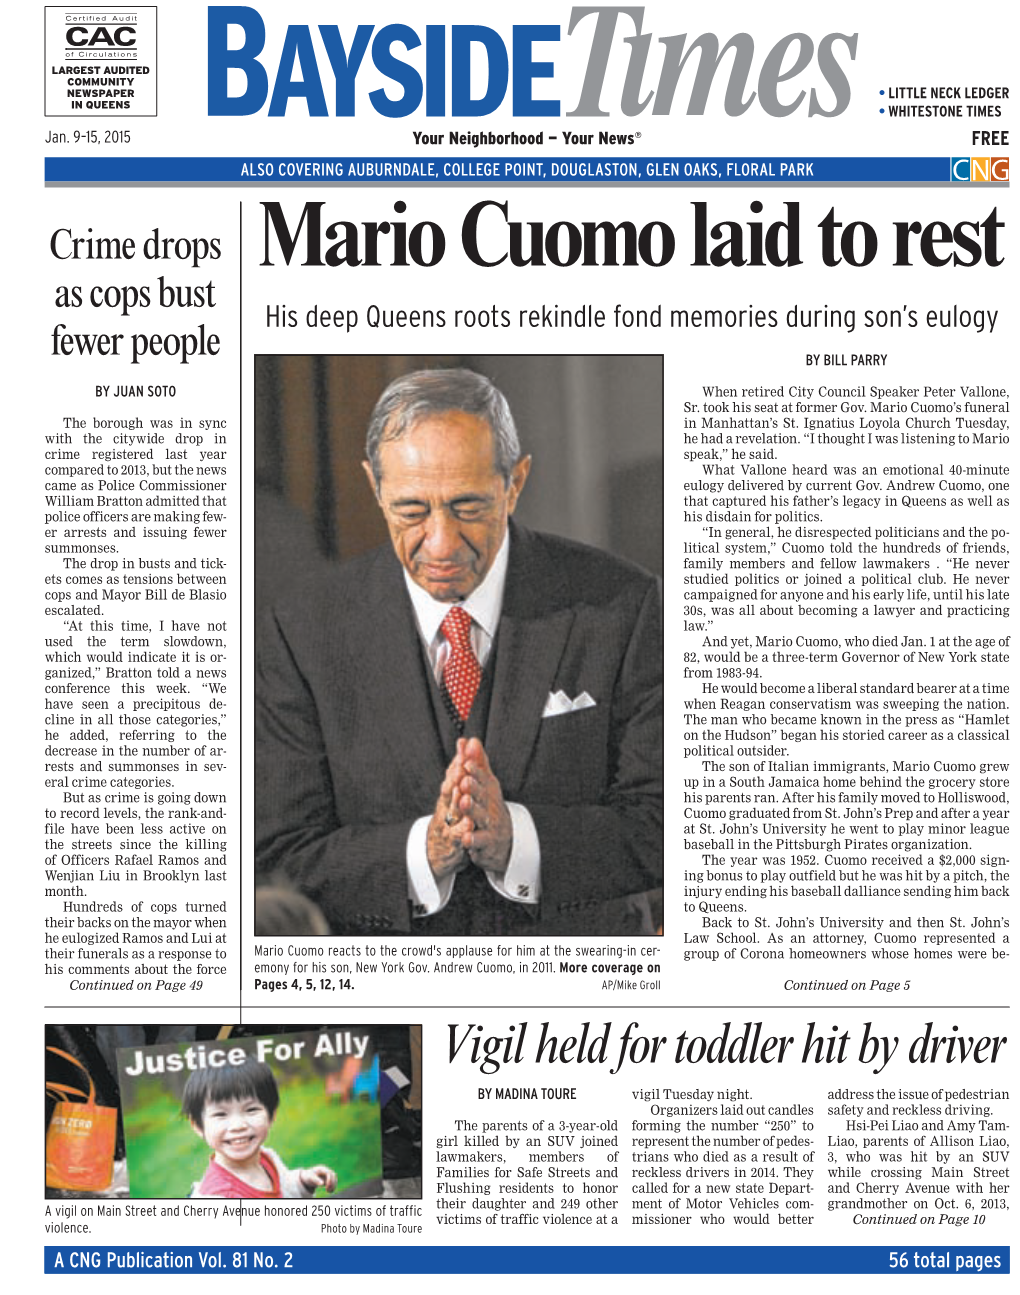 Mario Cuomo Laid to Rest As Cops Bust His Deep Queens Roots Rekindle Fond Memories During Son’S Eulogy